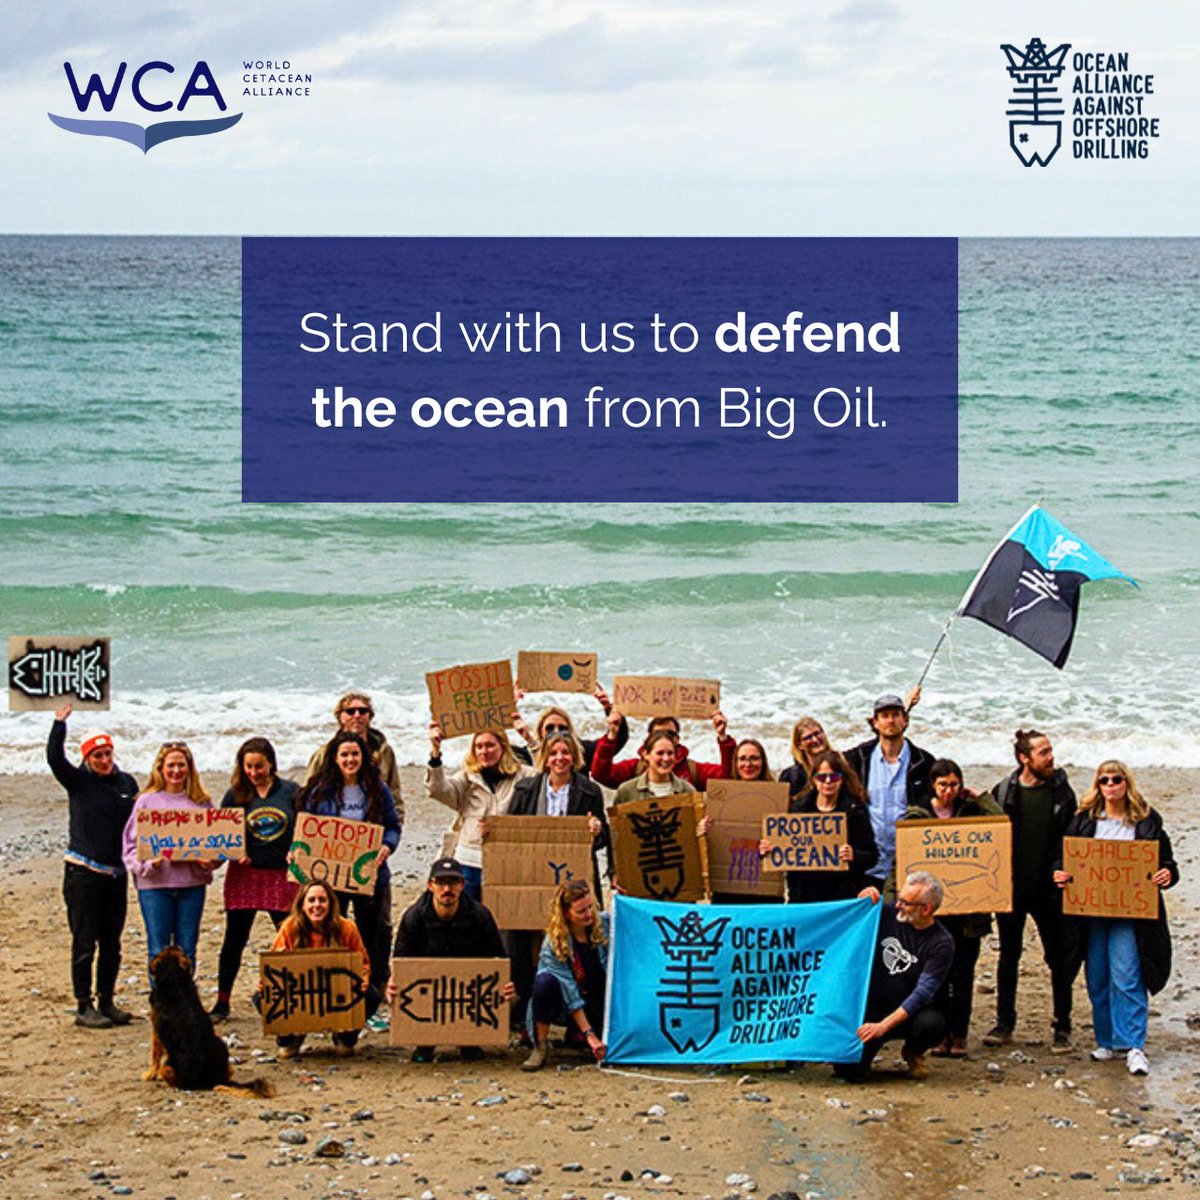 Breaking: @Shell just announced BILLIONS in profit, at the expense of our ocean and wildlife. 😡 We joined the Ocean Alliance Against Offshore Drilling because we won’t stand by while oil giants plunder the planet. 🐋 ✊ Ask your MP to say no to Big Oil: act.oceana.org/page/143684/ac…